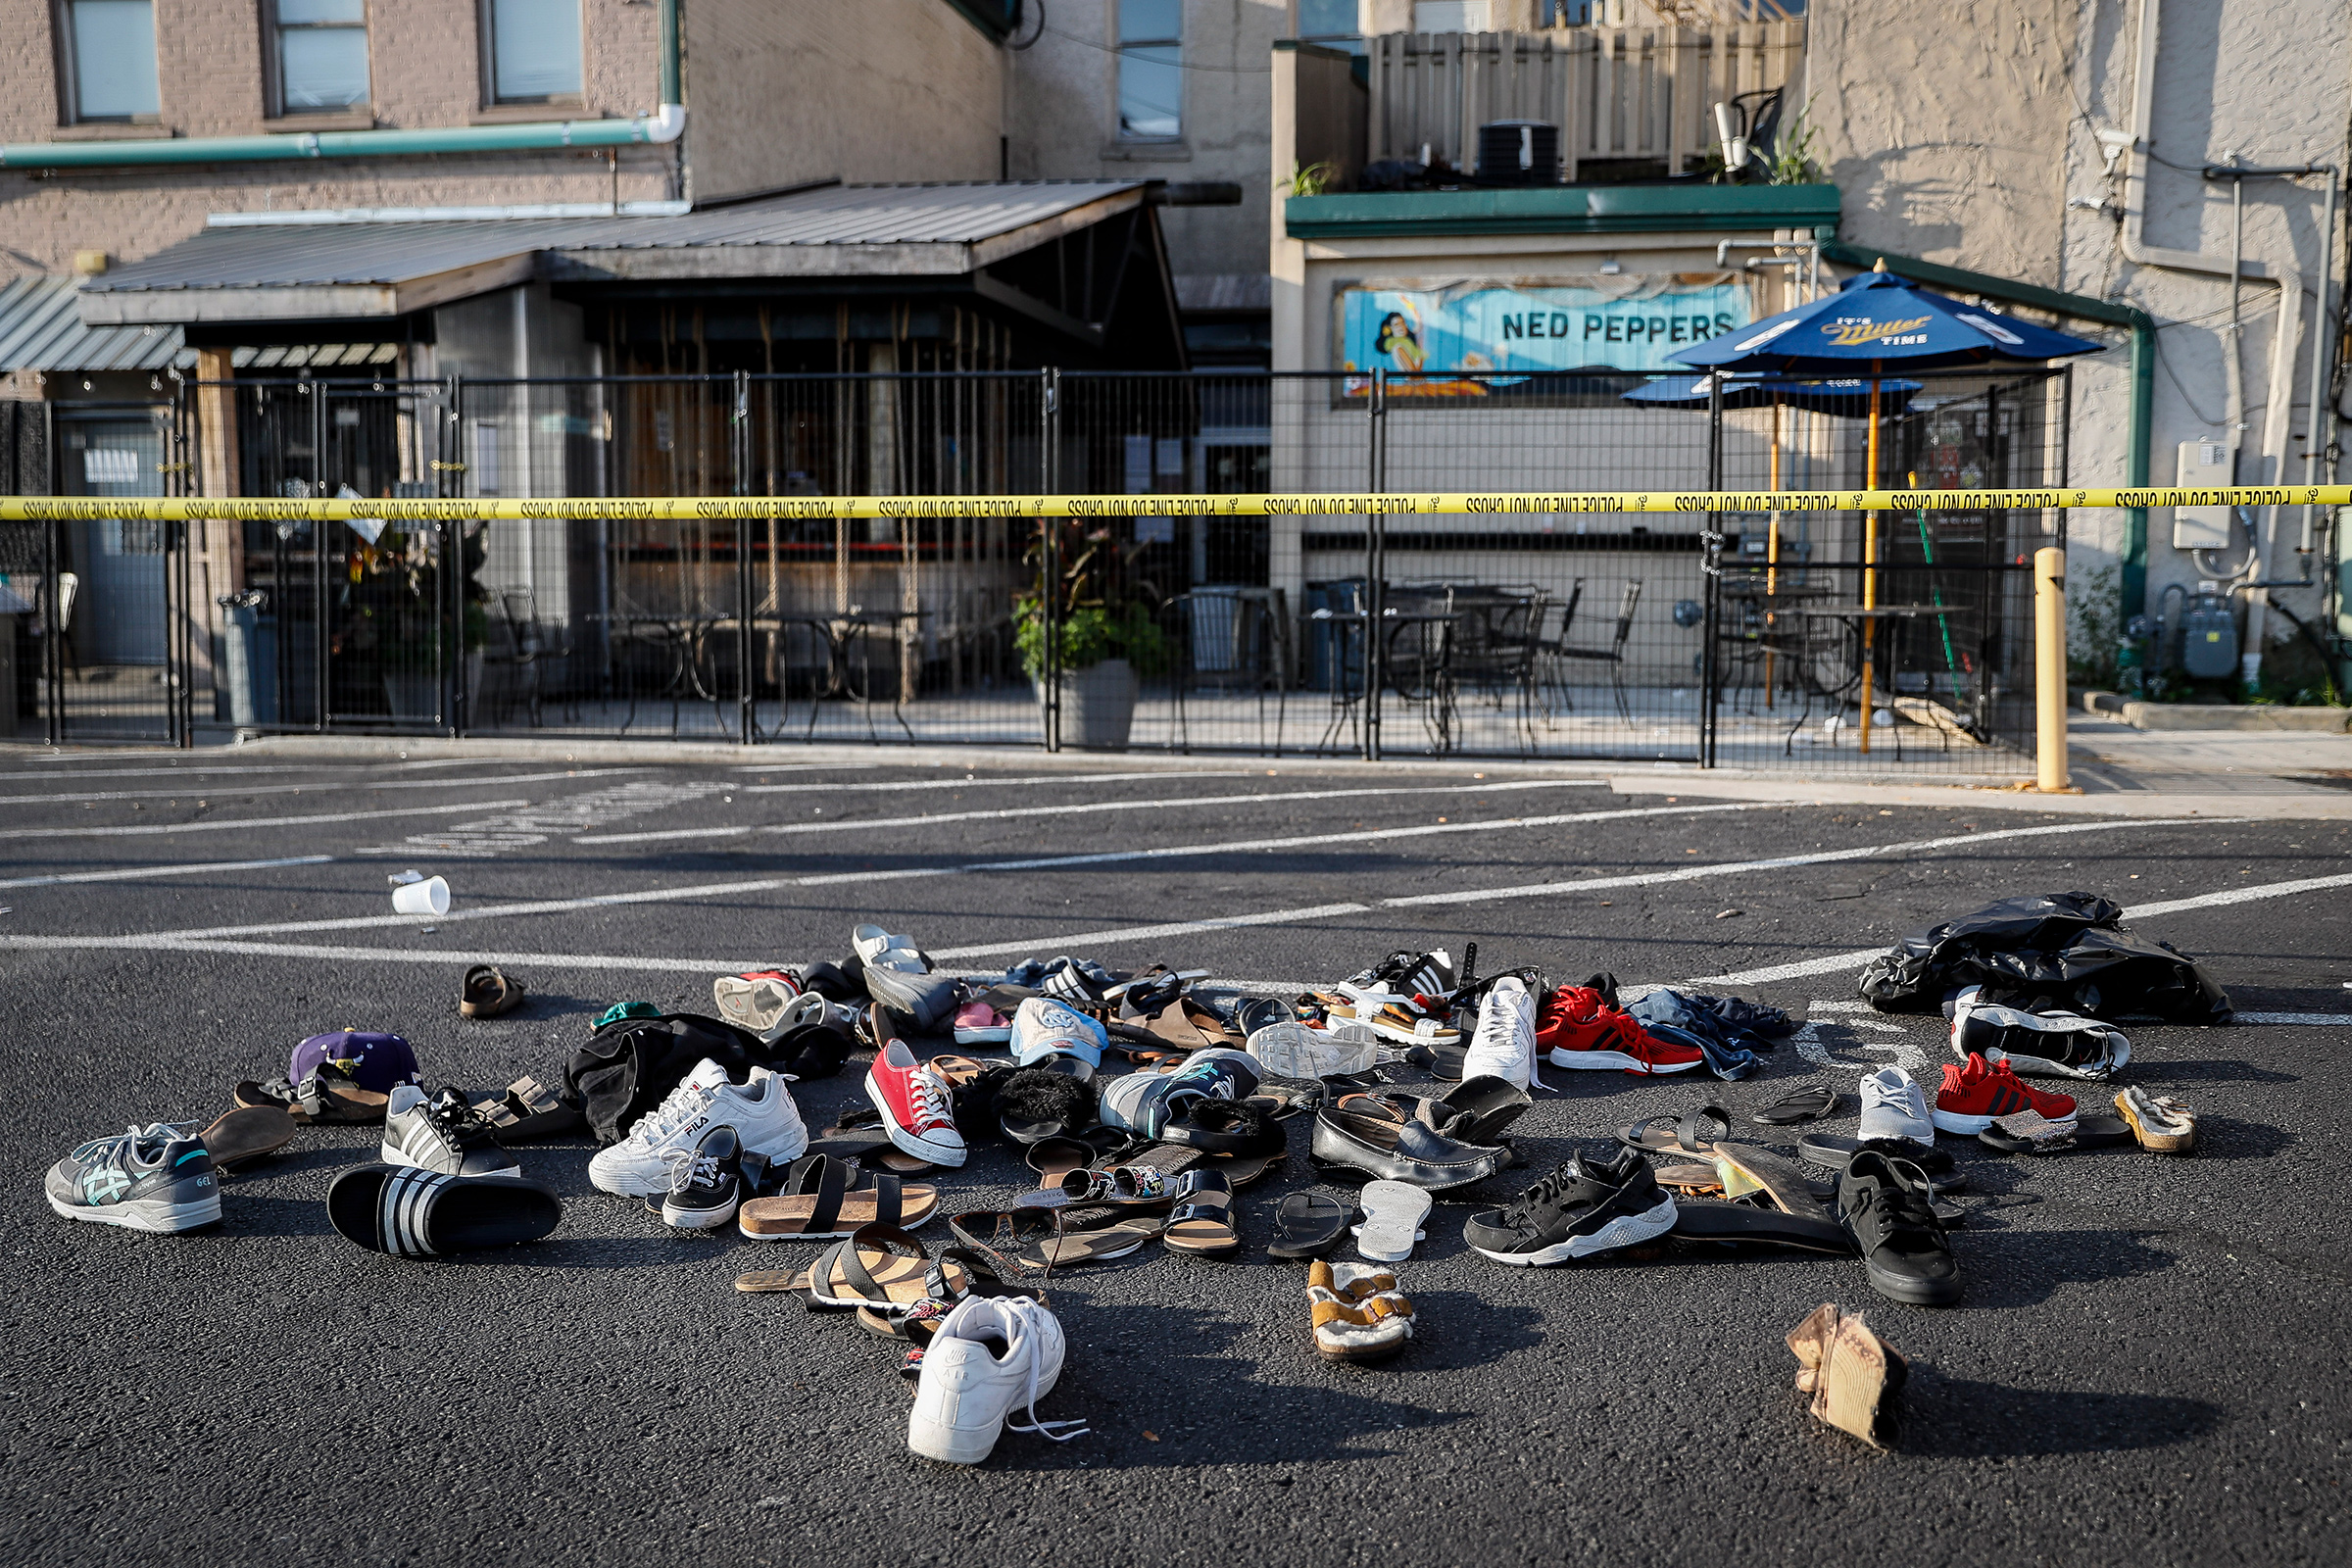 Shoes are piled outside the scene of a mass shooting including Ned Peppers bar, Sunday, Aug. 4, 2019, in Dayton, Ohio. Several people in Ohio have been killed in the second mass shooting in the U.S. in less than 24 hours, and the suspected shooter is also deceased, police said. (John Minchillo—AP)